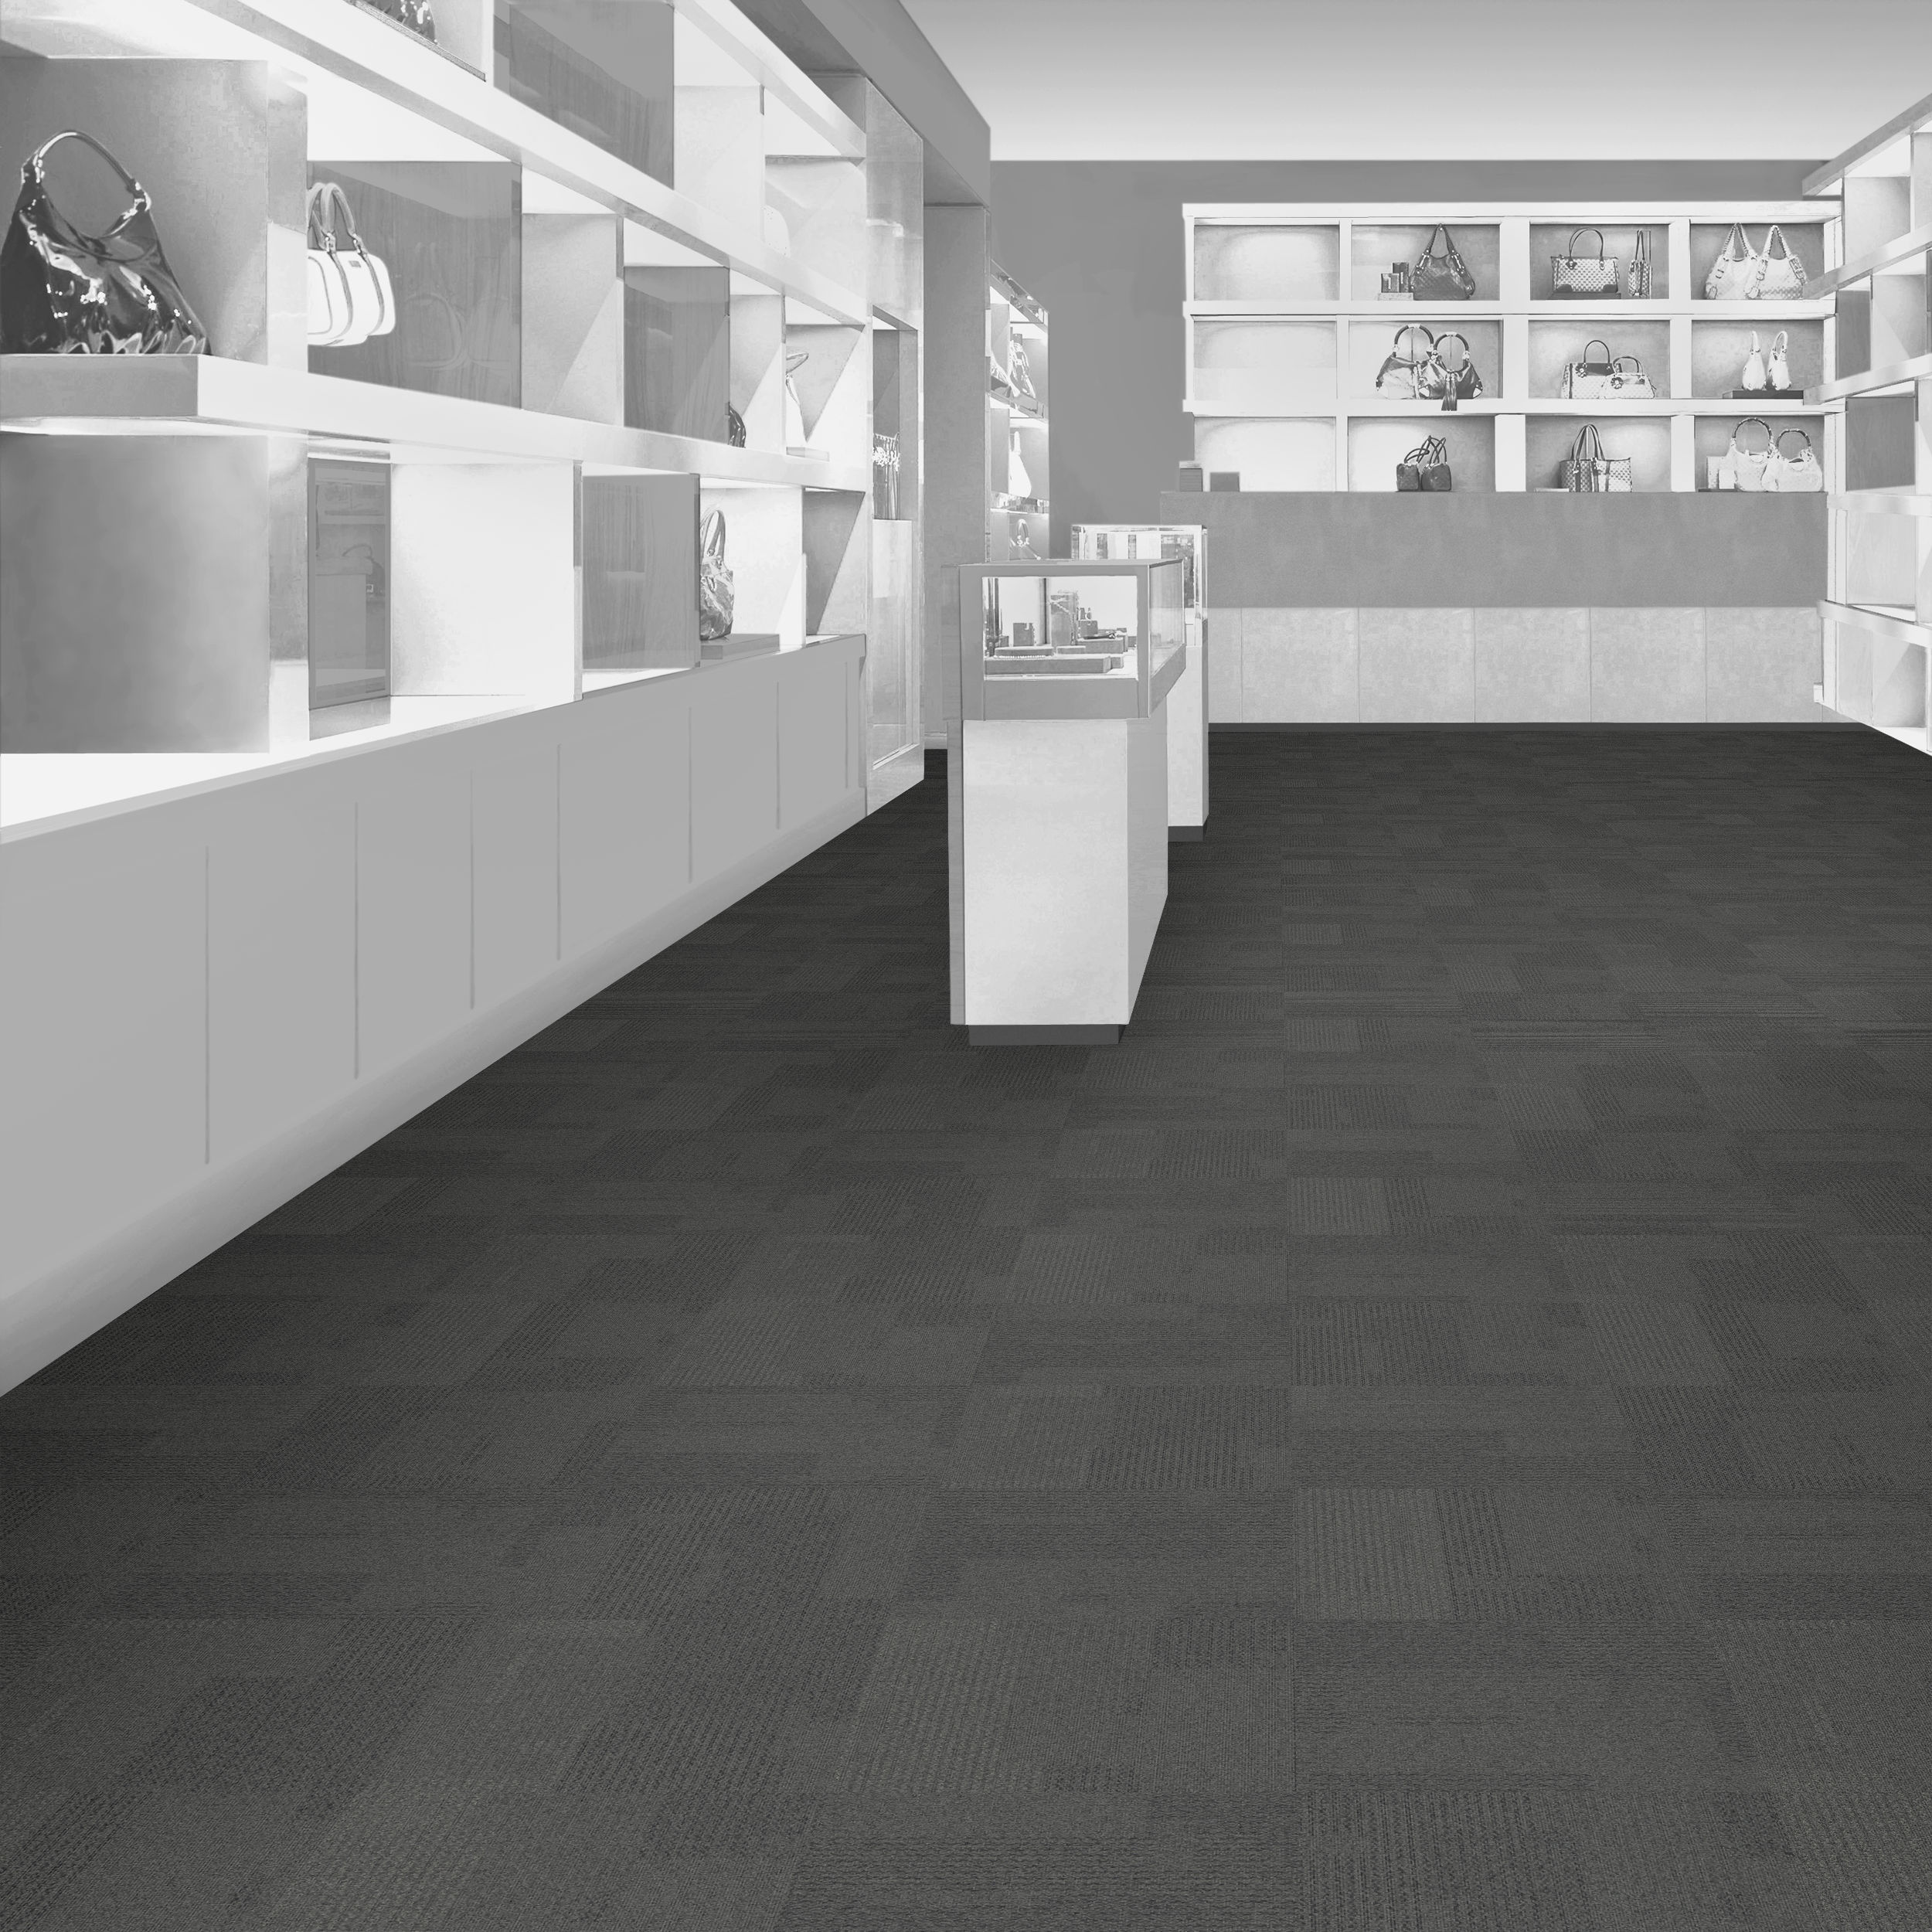 Pewter Transformation Carpet Tile in commercial store.